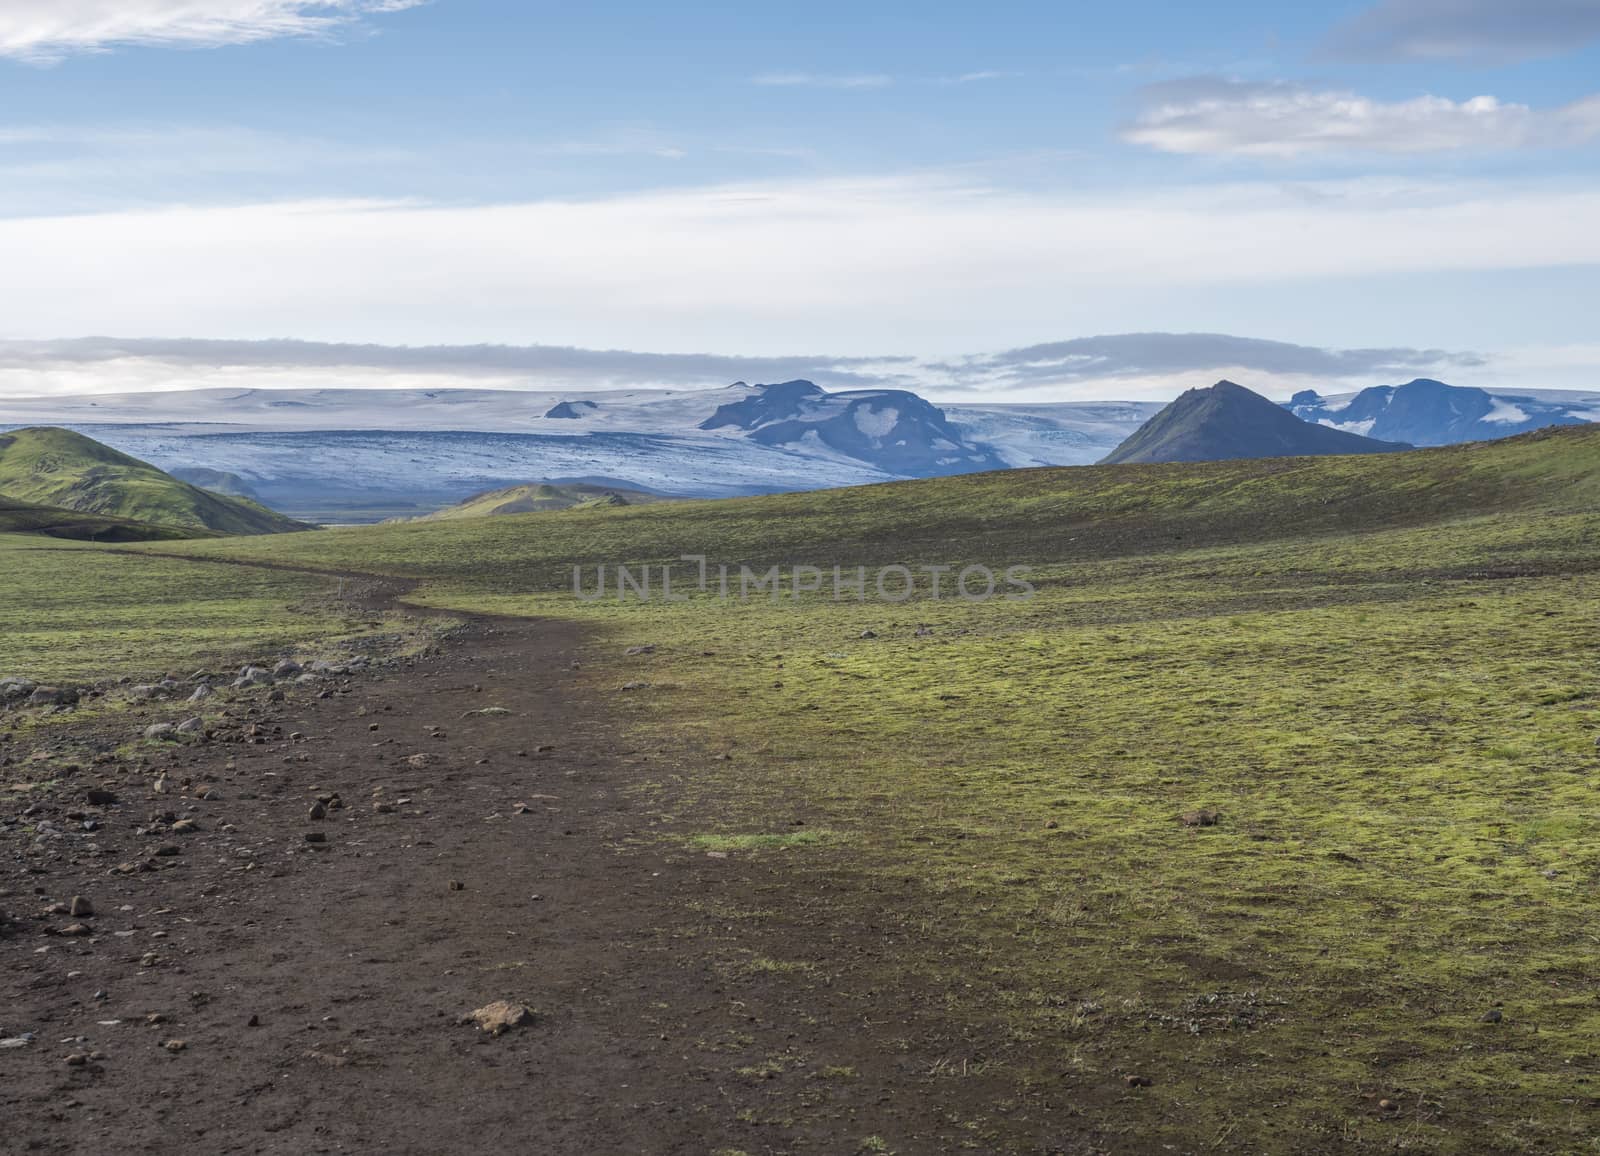 Icelandic landscape with footpath of Laugavegur hiking trail with view on Tindfjallajokull glacier, green hills and lava gravel ground covered by grass and moss. Fjallabak Nature Reserve, Iceland.